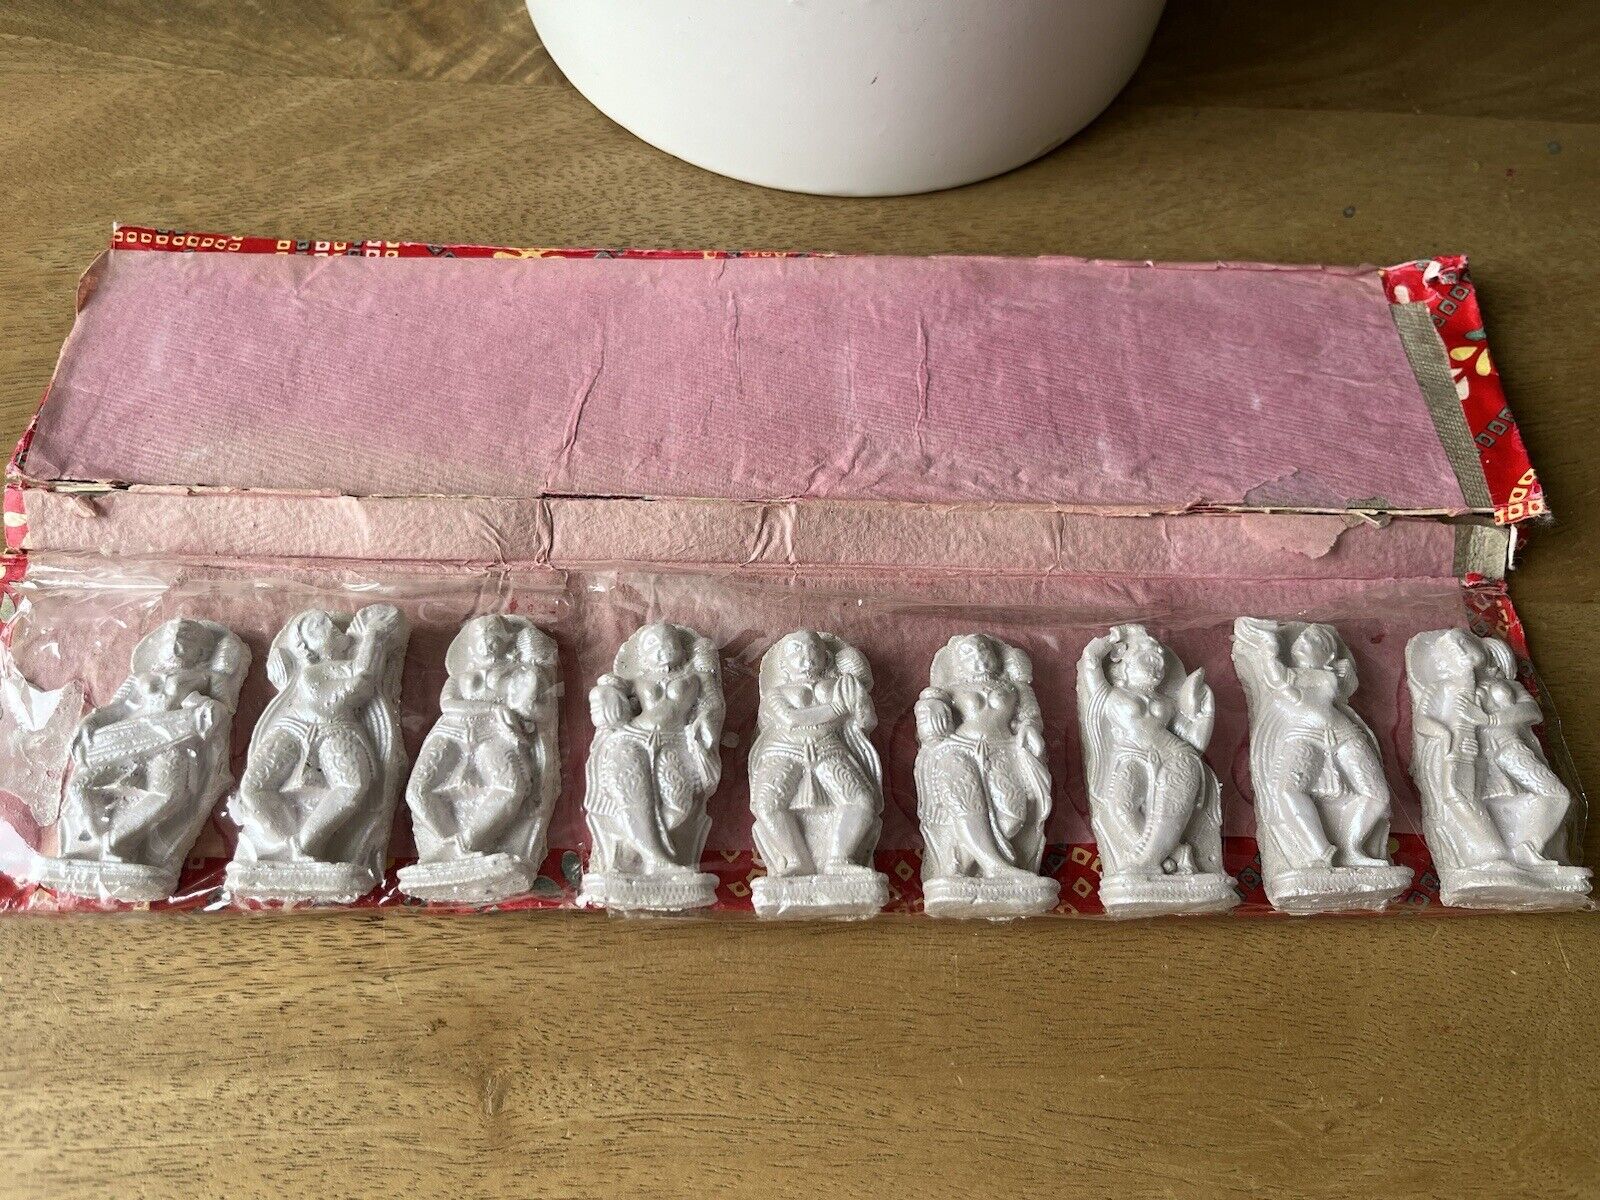 Set of 9 White Vintage Chinese Figurines in Red Box White Asian Collectibles